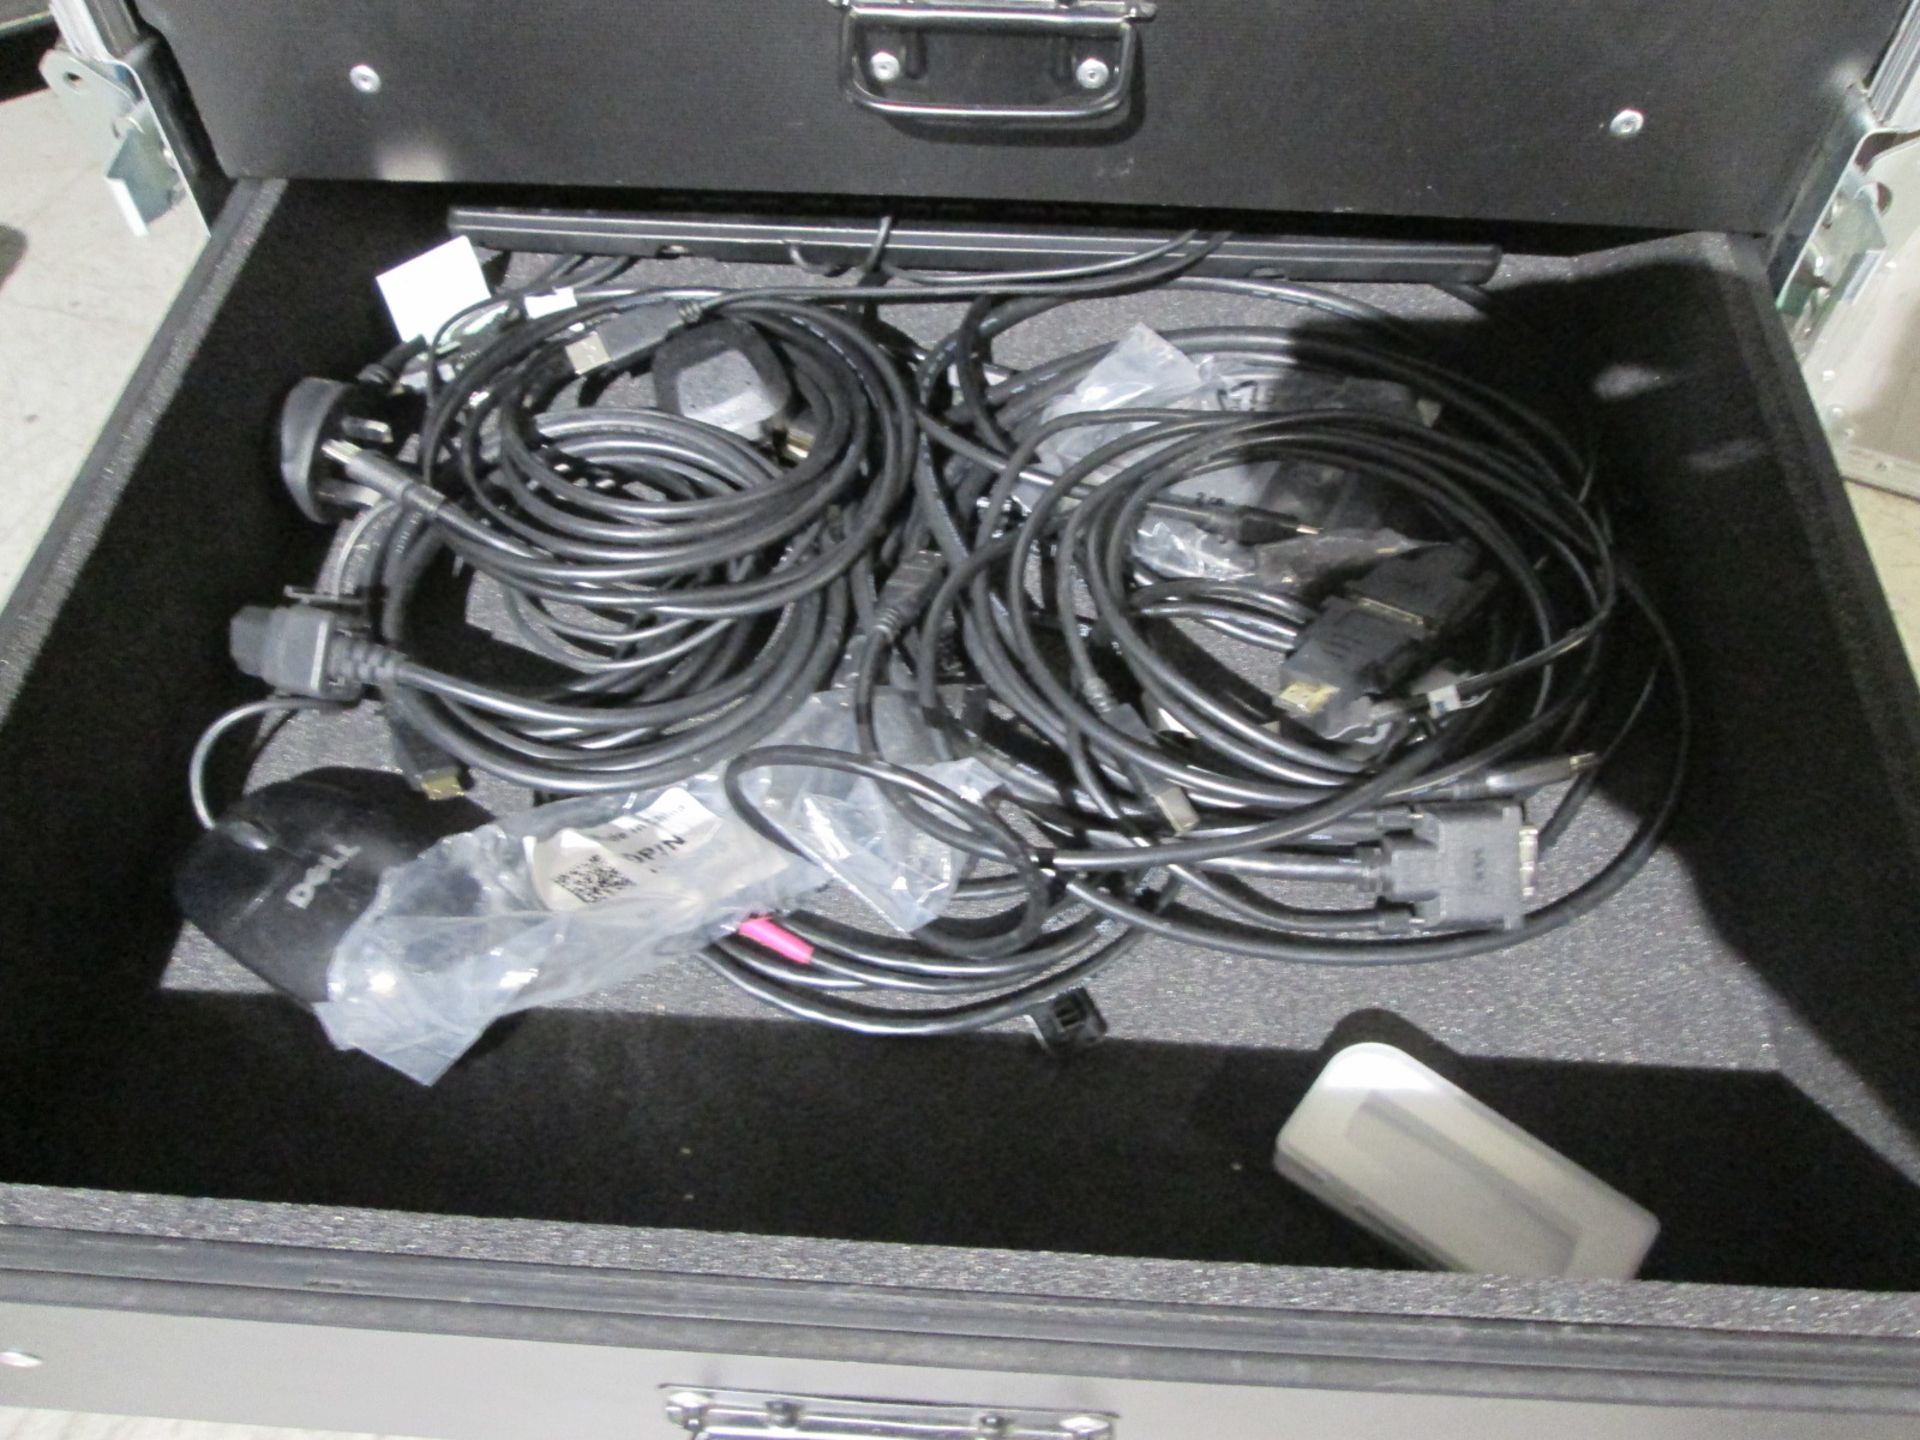 Green Hippo V5 Hippotiser Media Graphics Server with fader remote panel. S/N 2200. In flight case - Image 4 of 9